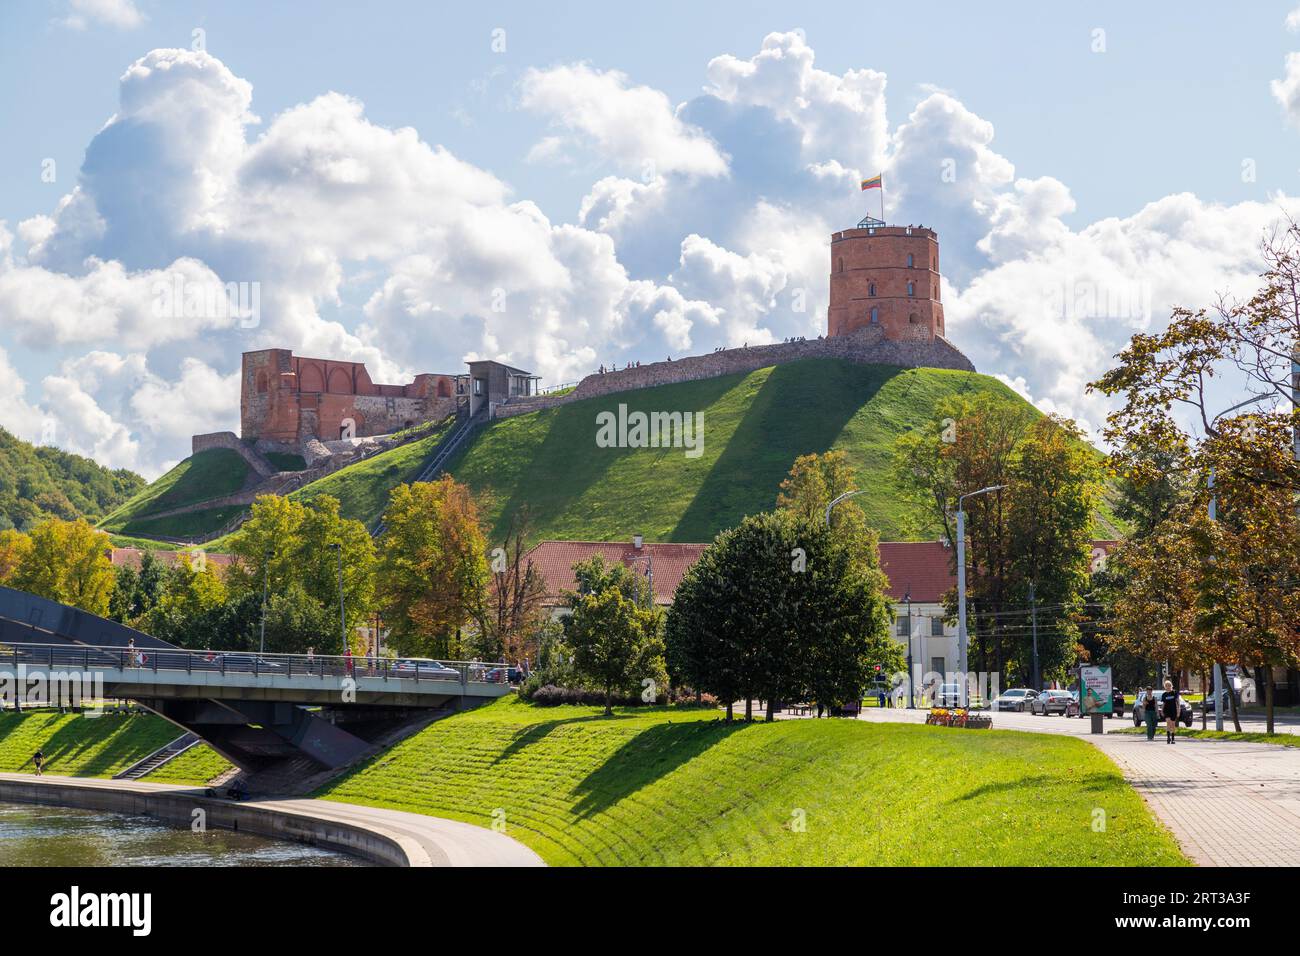 VILNIUS, LITHUANIA - 3RD SEPT 2023: A view towards the Gediminas Castle Tower in Vilnius Lithuania during the day from near the Neris River. People ca Stock Photo